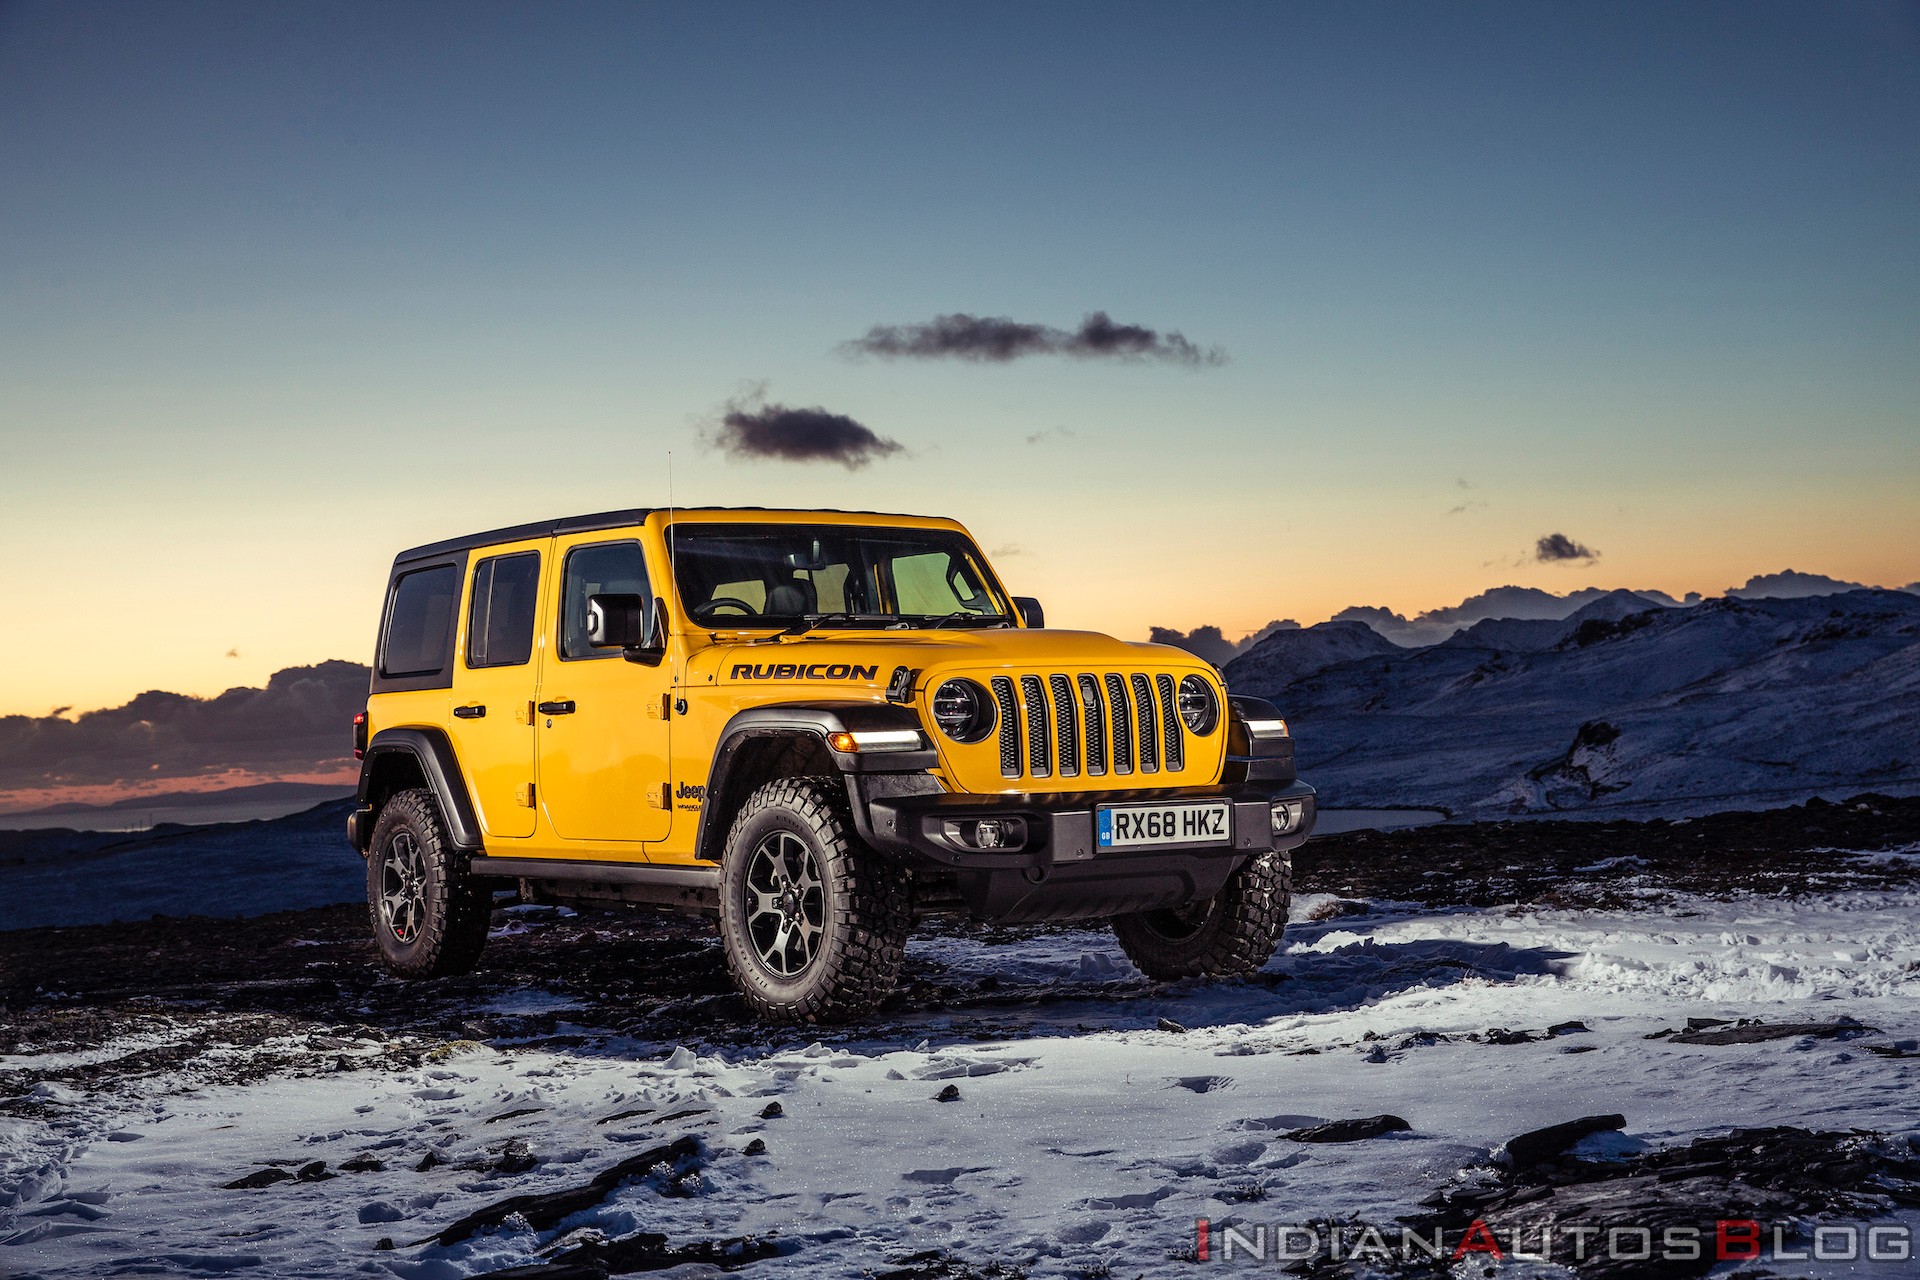 Jeep Wrangler To Compete With “Hardcore Rigs” In India | Modern Jeeping  News & Education